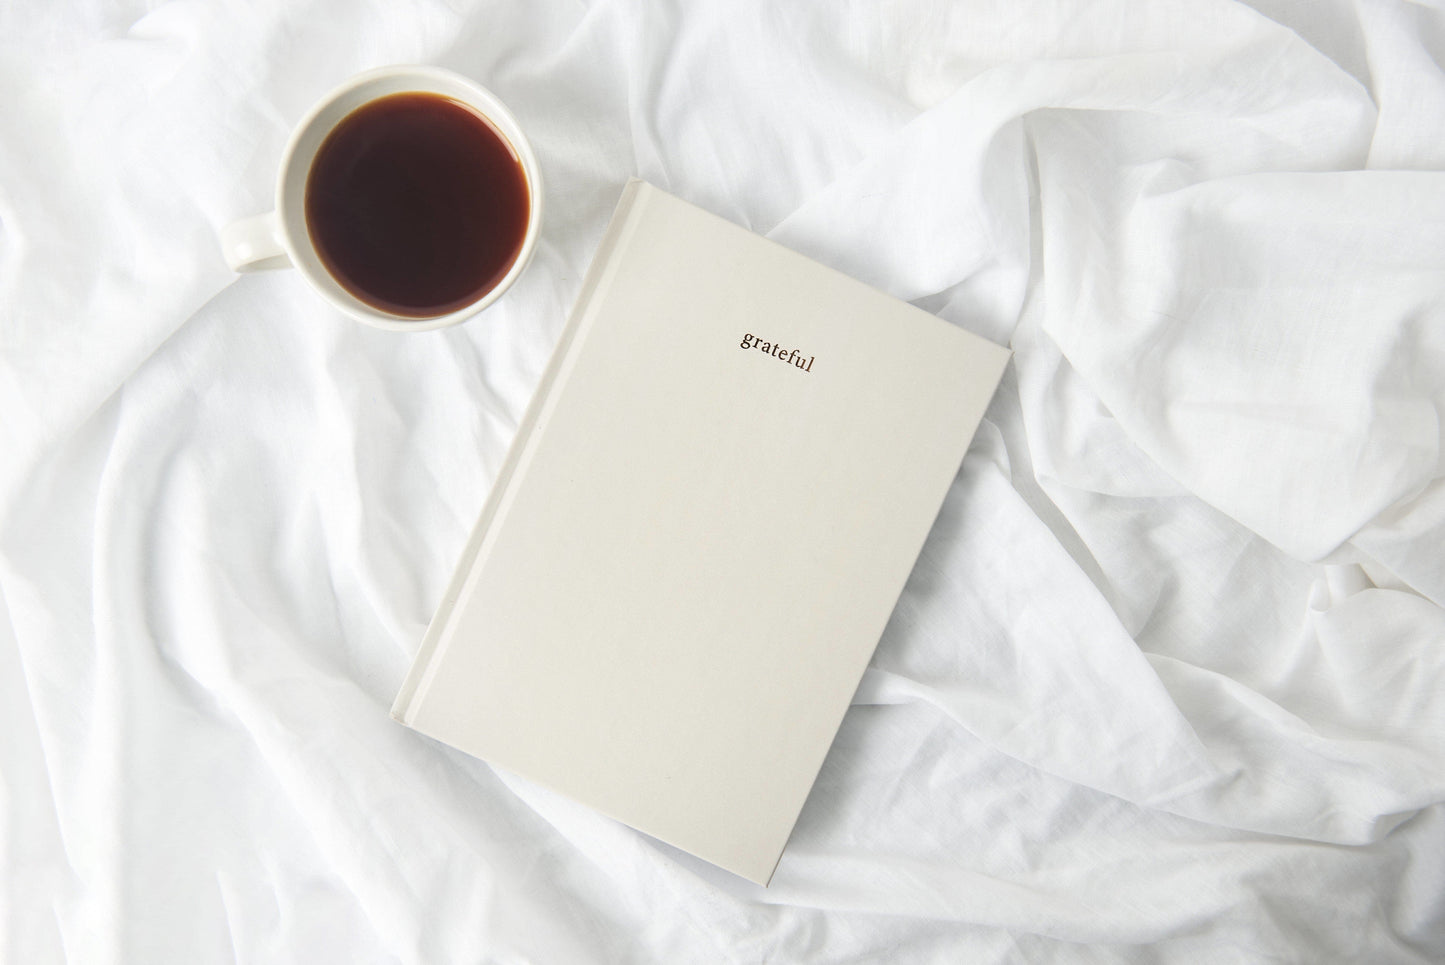 A daily gratitude journal sitting on a bed with a cup of coffee beside it